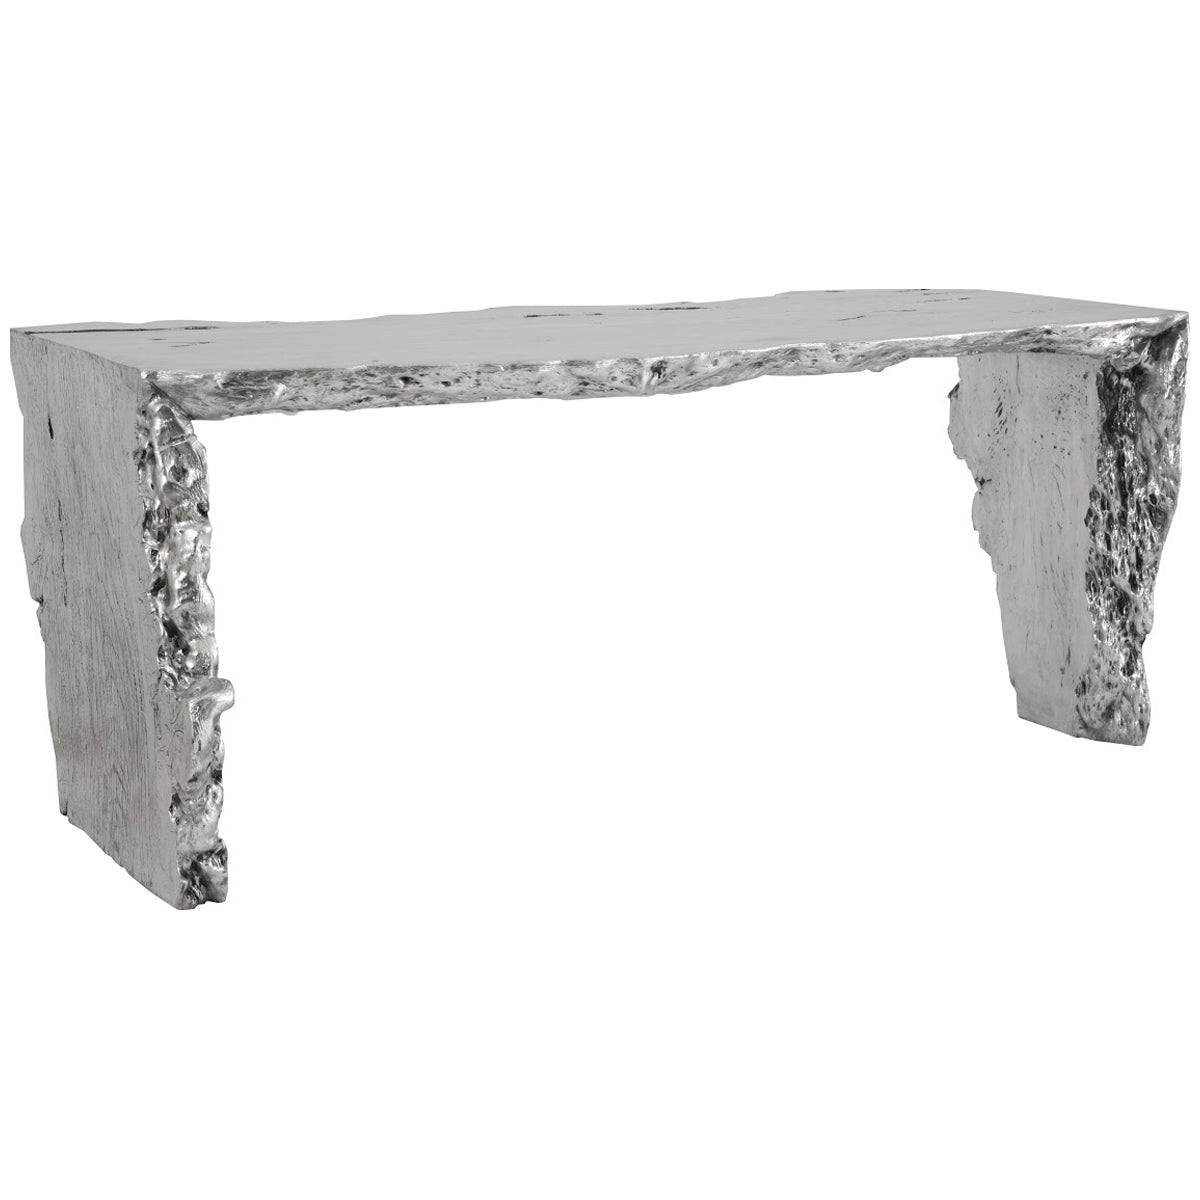 Phillips Collection Waterfall Silver Desk